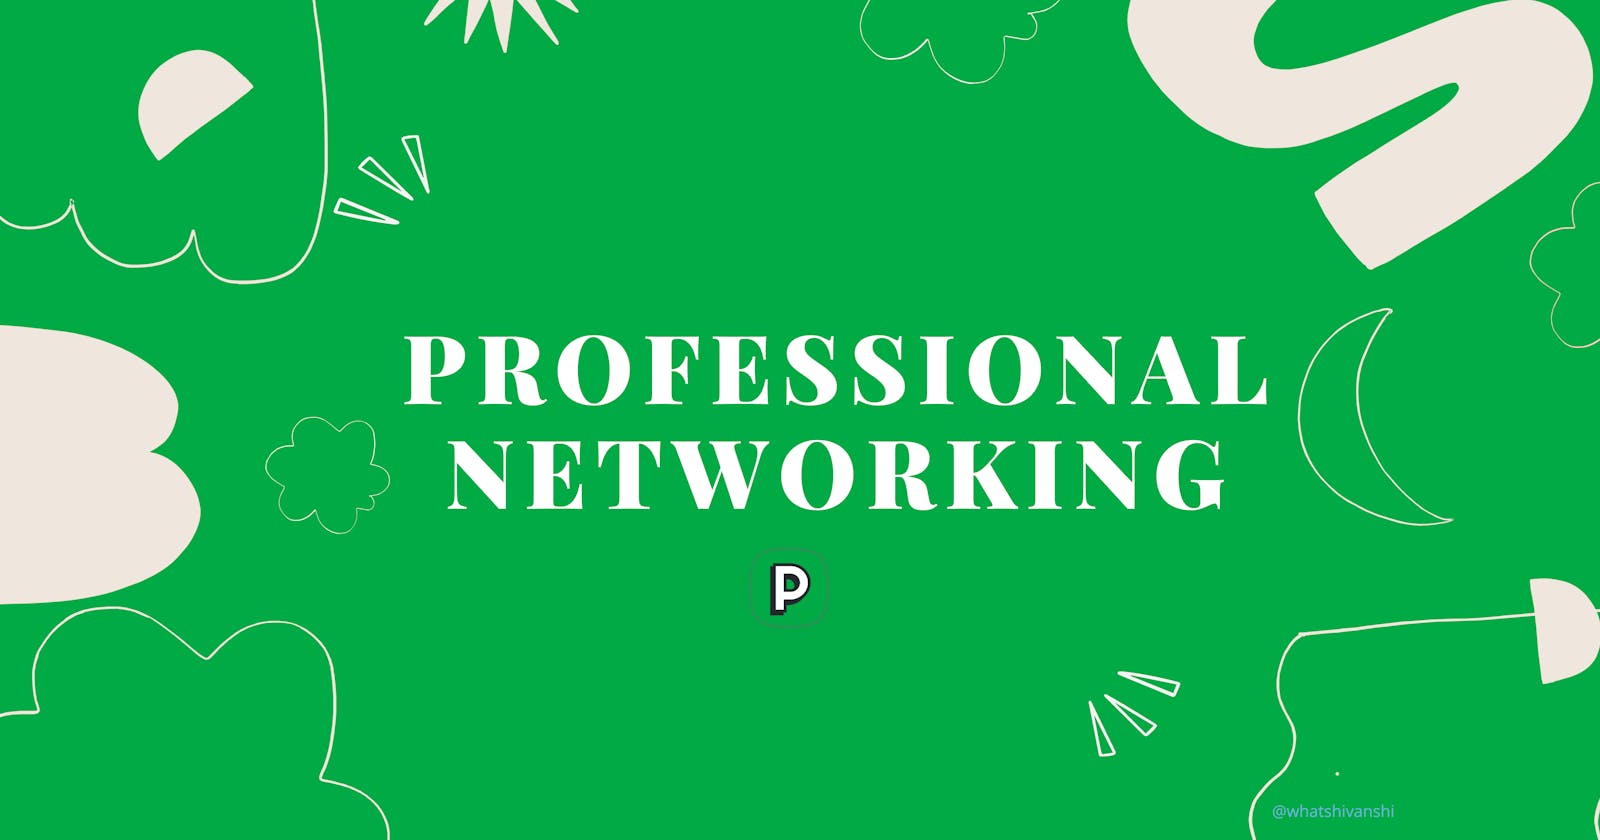 Professional Networking ftw!